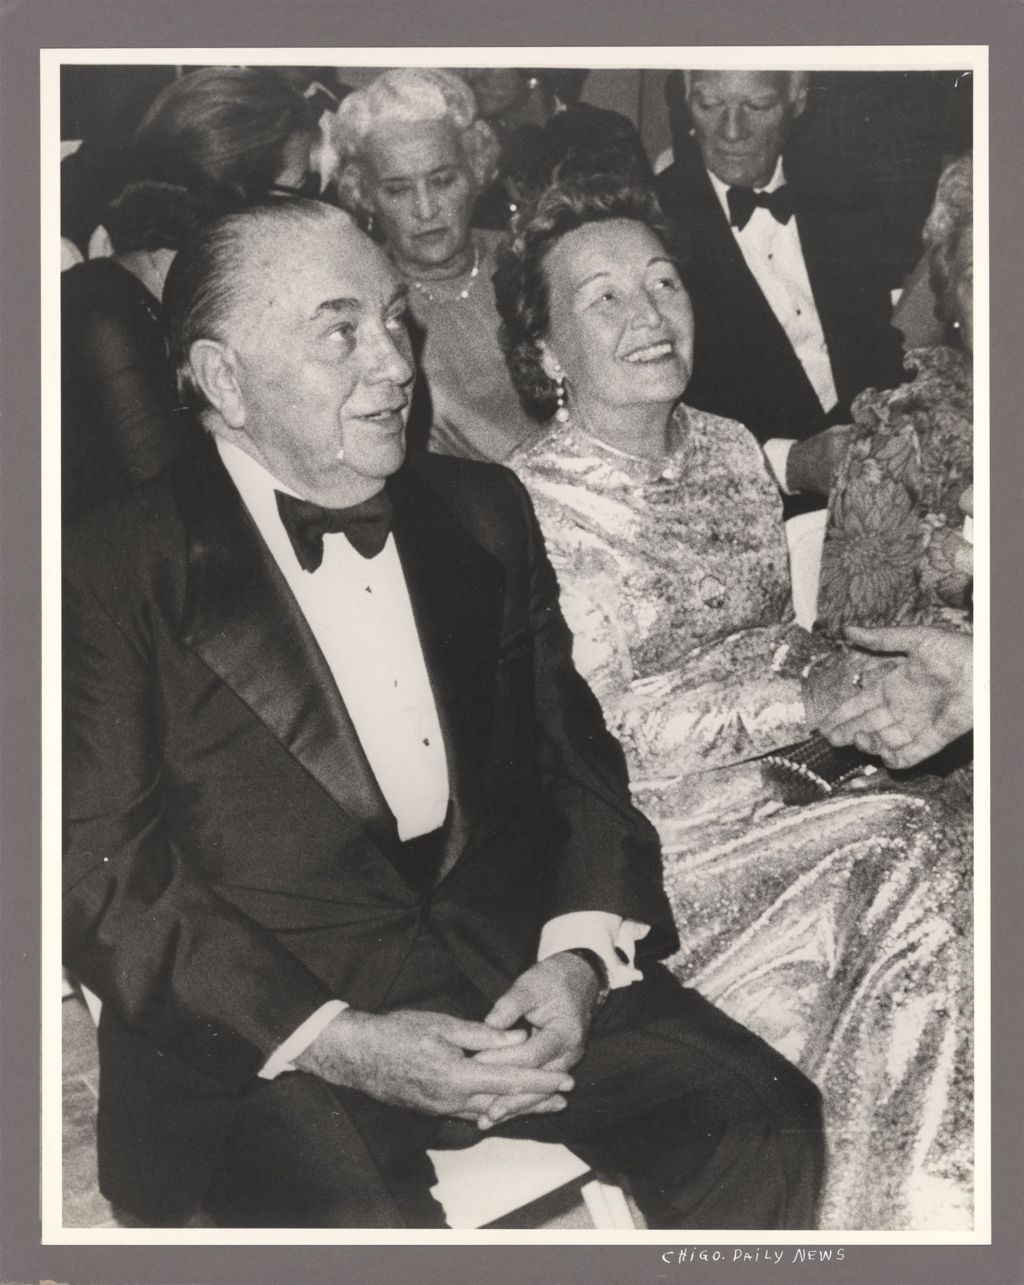 Miniature of Richard J. Daley and Eleanor Daley at a formal event.